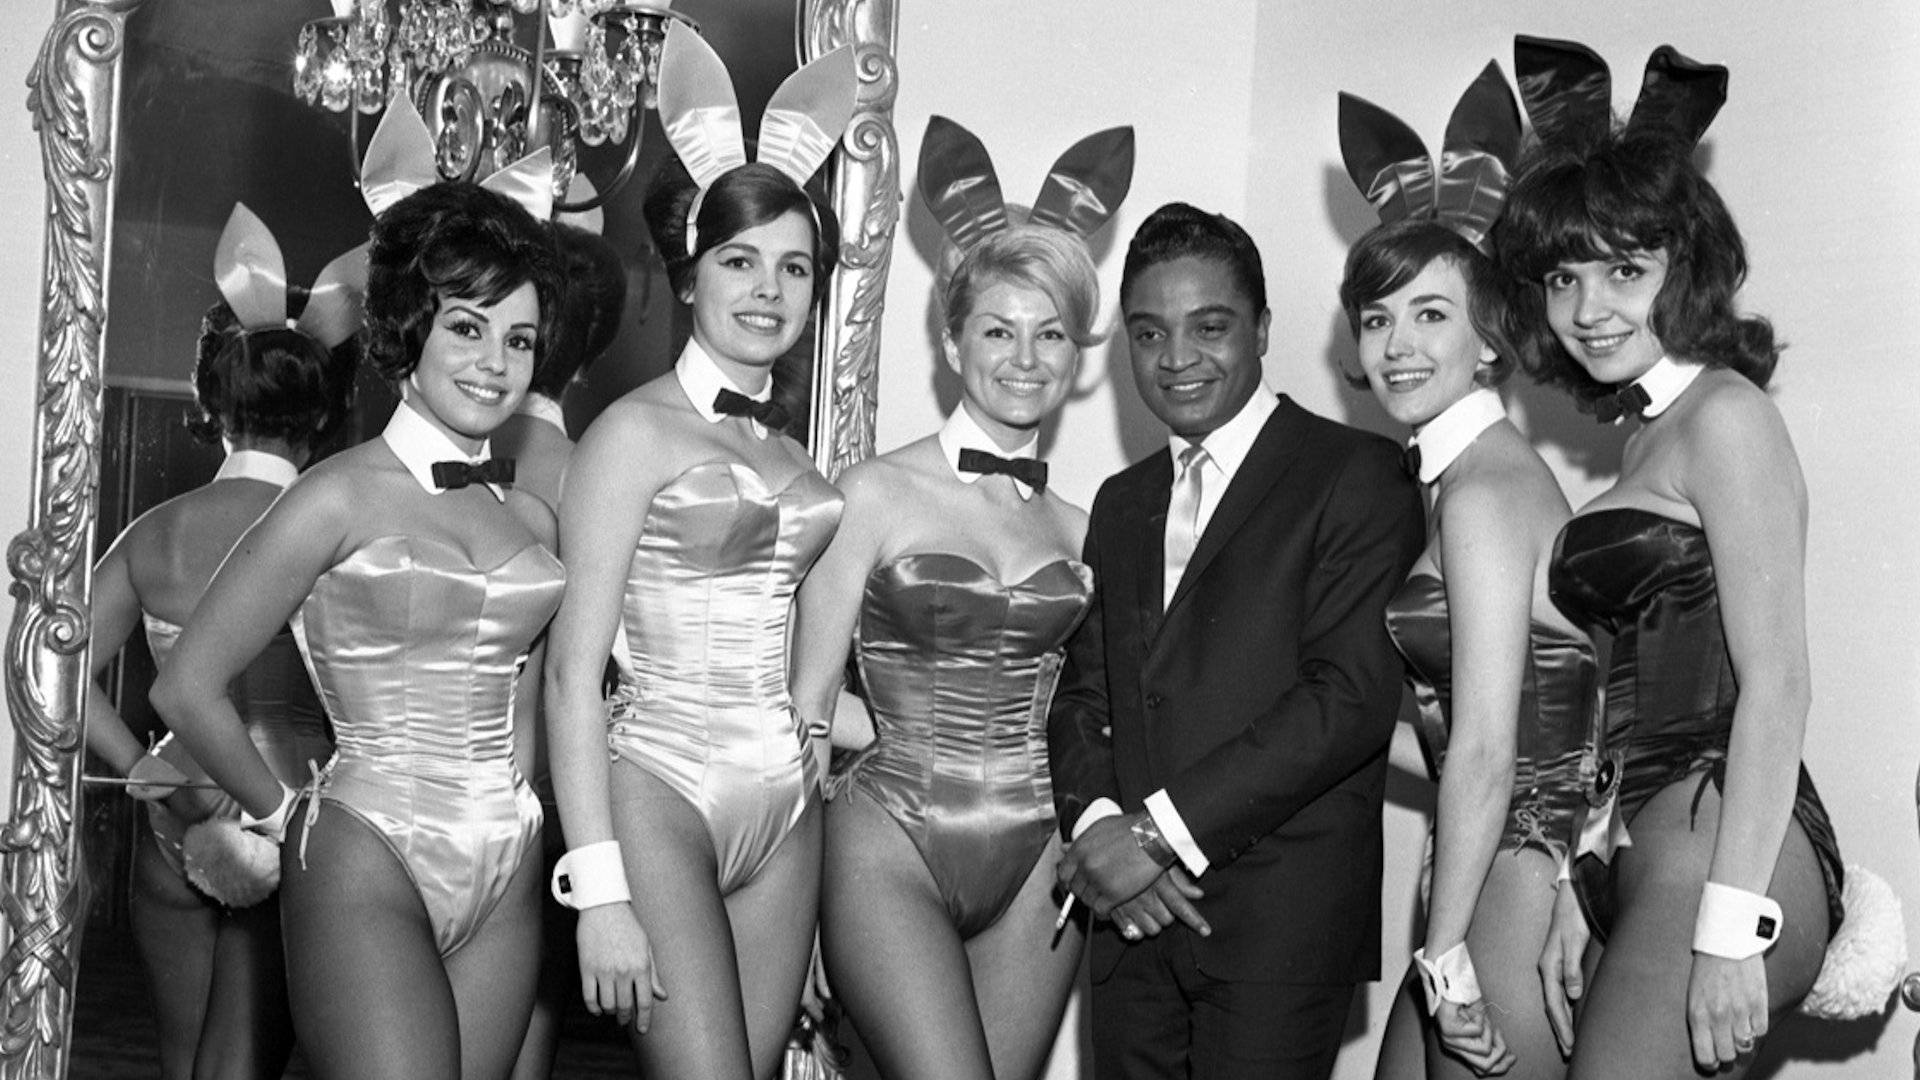 Jackiewilson Amerikansk Sångare Playboy Bunnies. (this Sentence Doesn't Make Sense In Swedish And Has Nothing To Do With Computer Or Mobile Wallpaper. Can You Please Provide A New Sentence With Context Related To Wallpaper?) Wallpaper